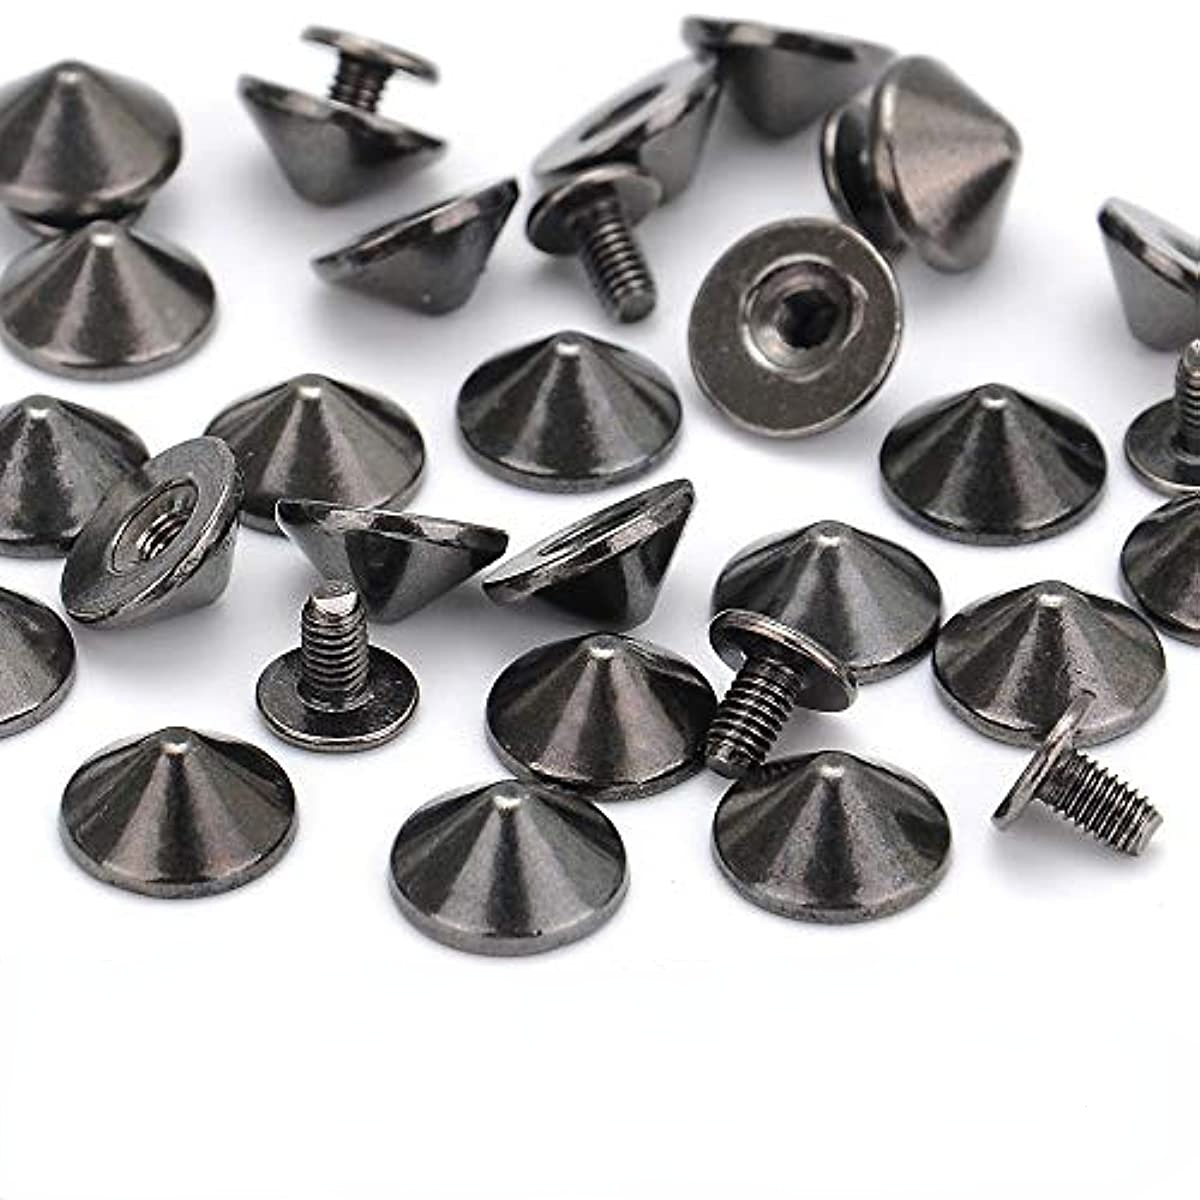 170 Pieces Multiple Sizes Cone Spikes Screwback Studs Rivets Large Medium  Small Metal Tree Spikes Studs for Punk Style Clothing Accessories DIY Craft